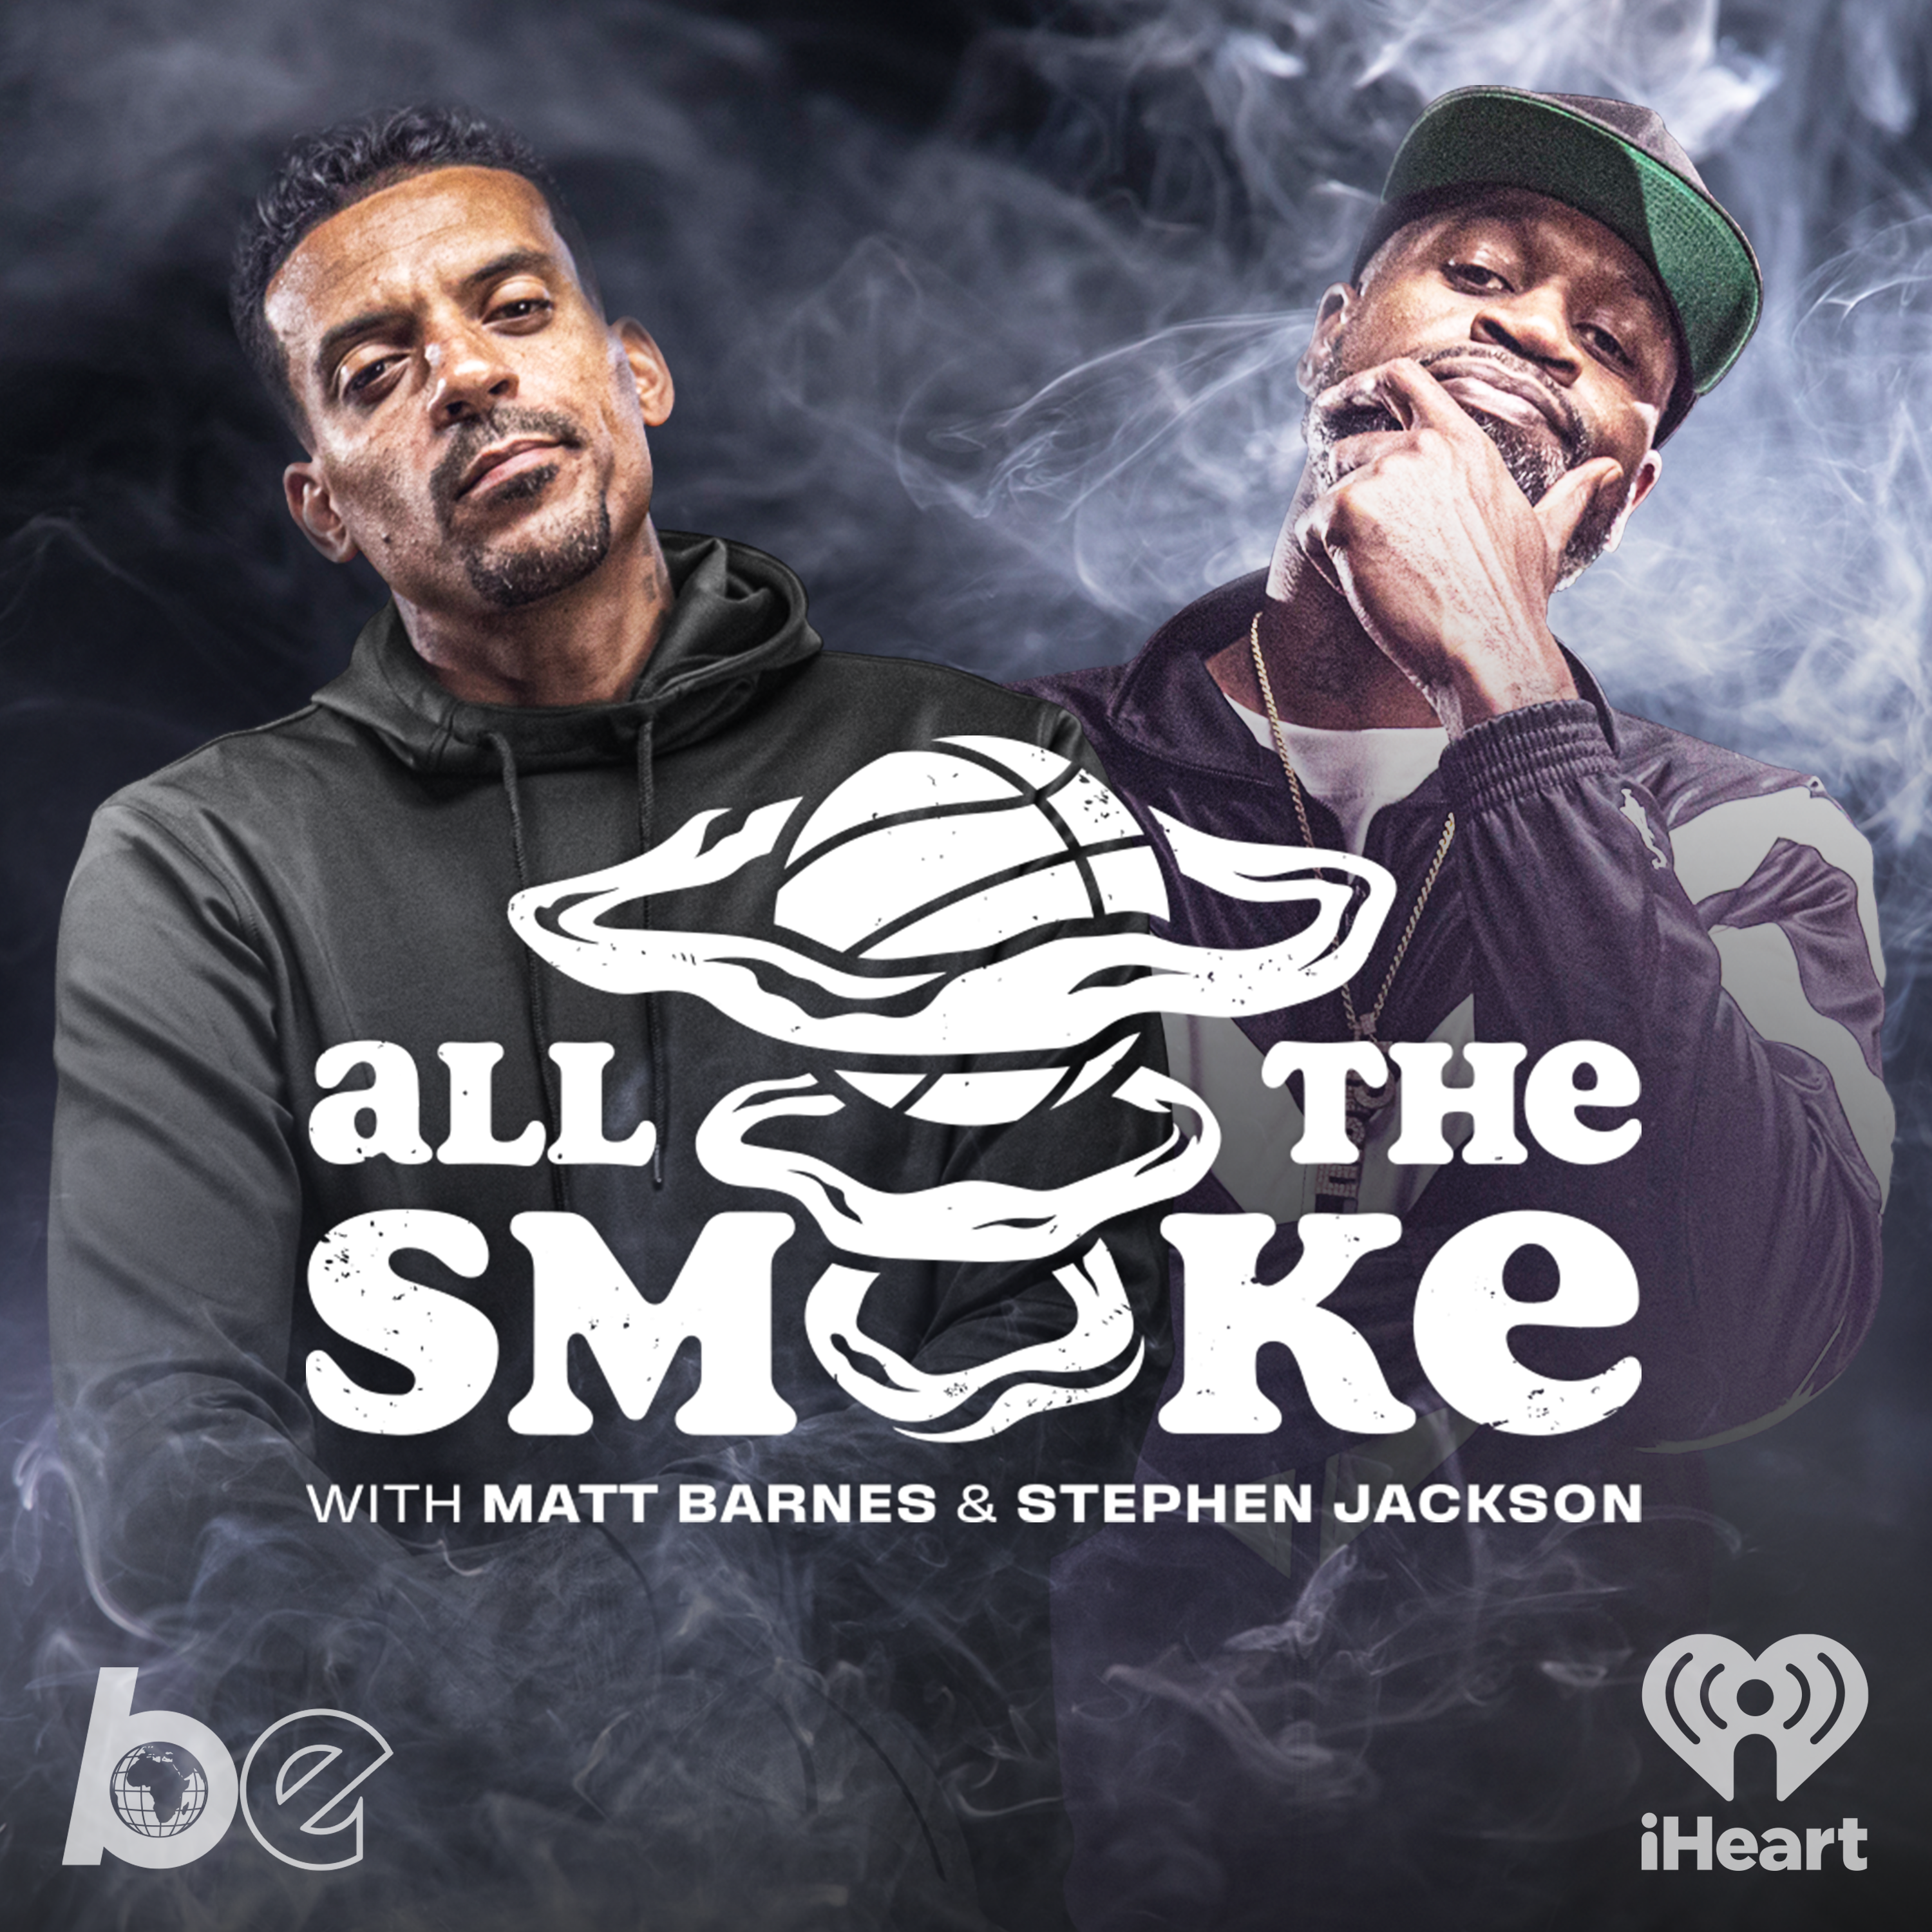 Kevin Hart | Ep 107 | ALL THE SMOKE Full Episode | SHOWTIME Basketball